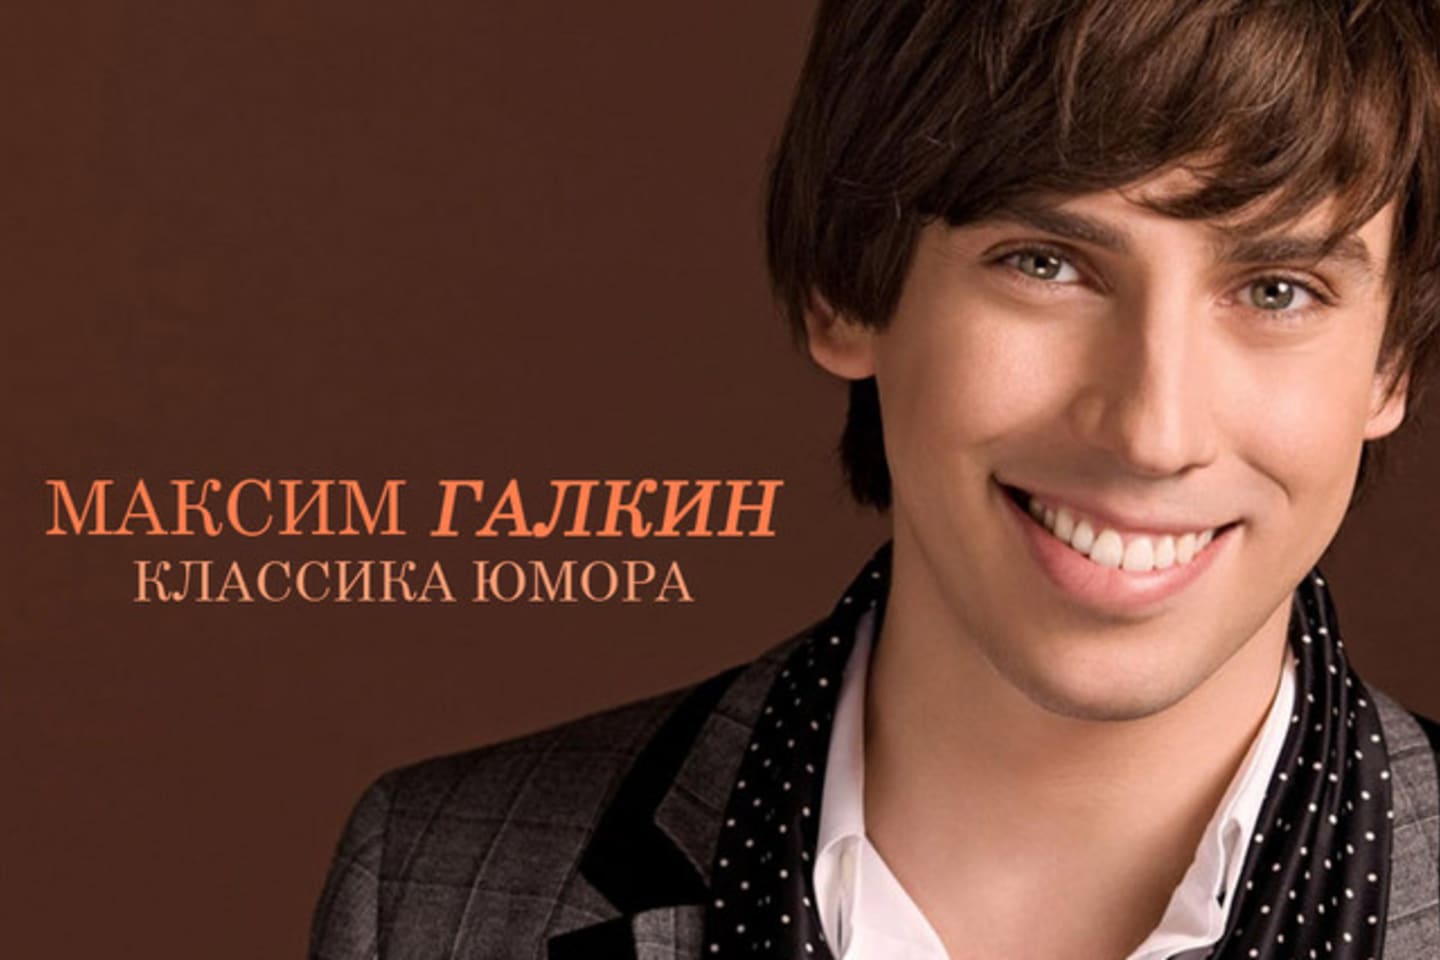 Maxim Galkin Tickets Buy or Sell Tickets for Maxim Galkin Tour Dates